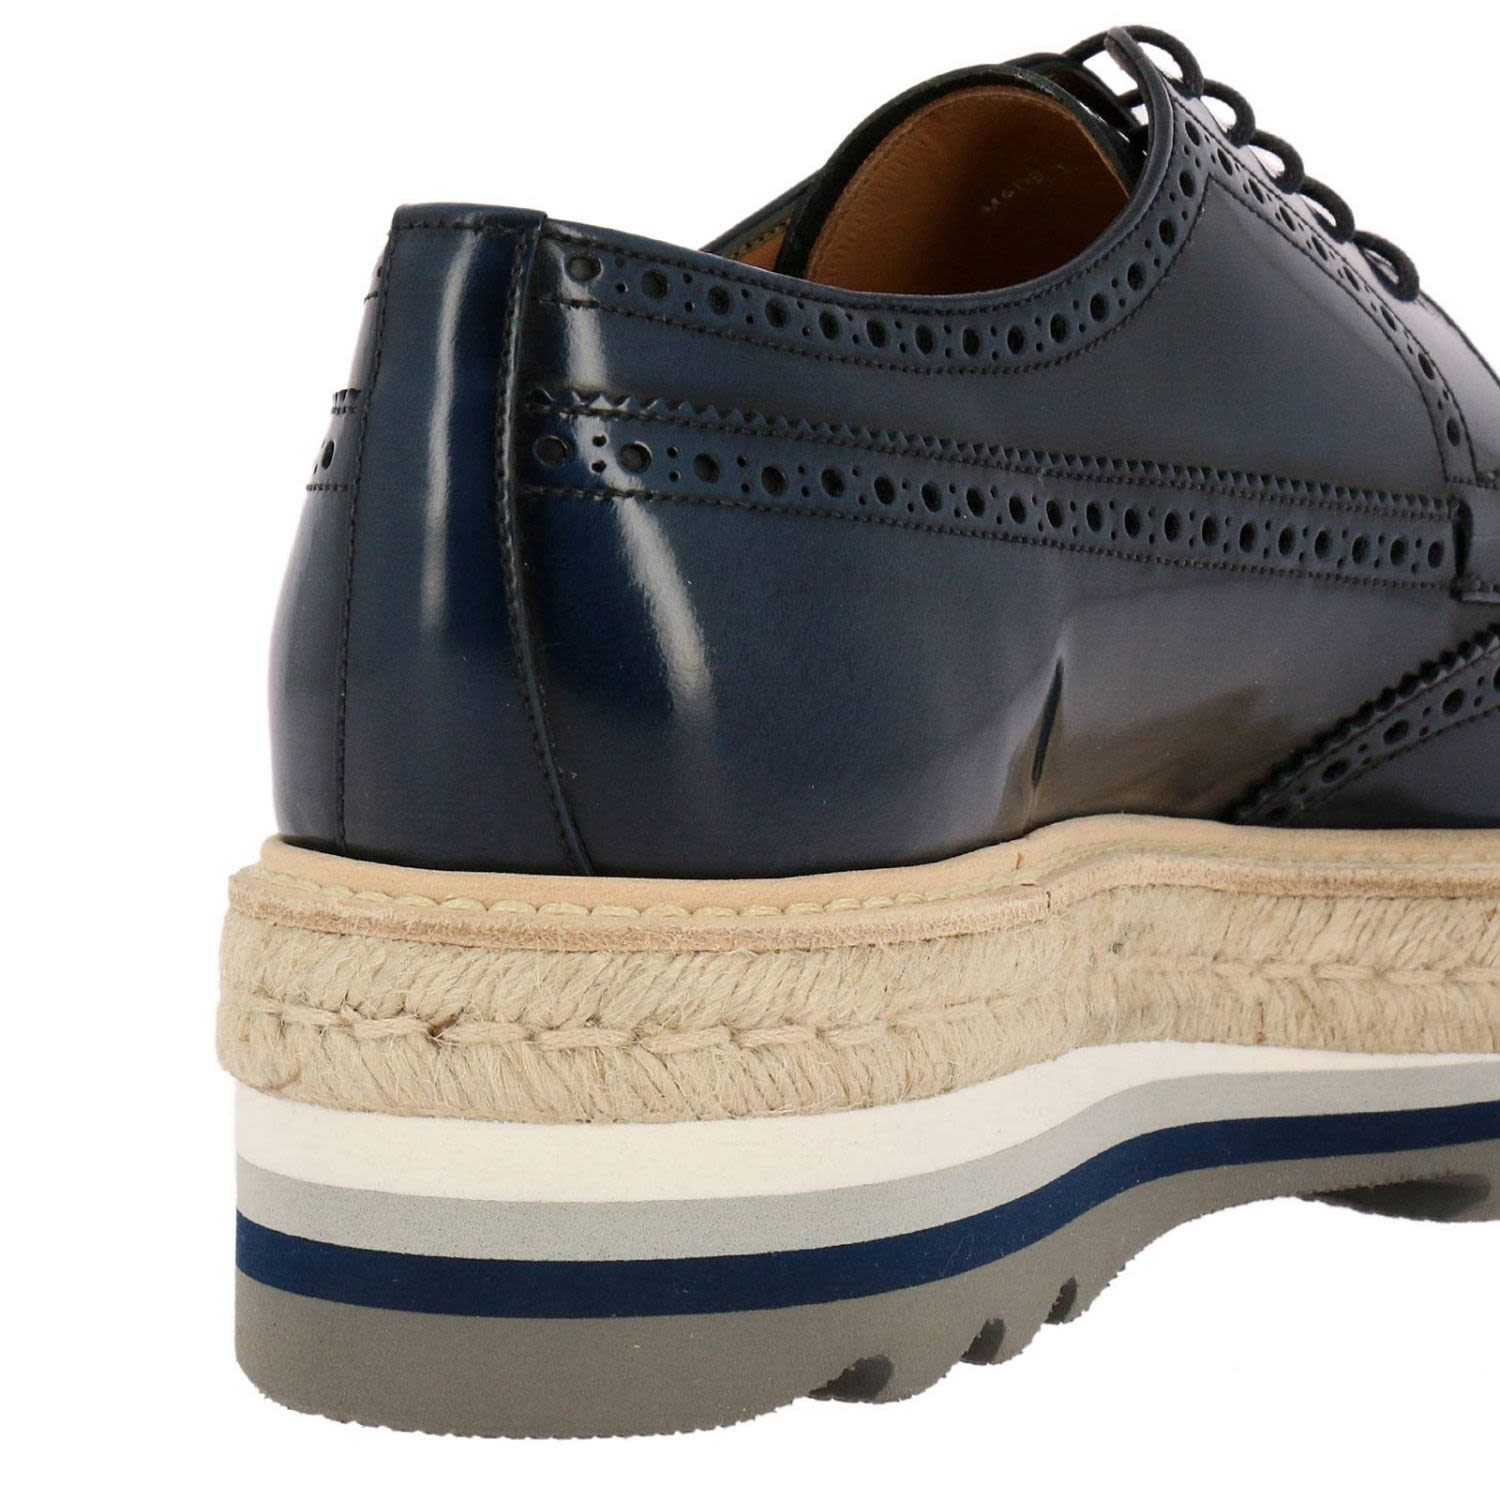 italist | Best price in the market for Prada Brogue Shoes Shoes Men